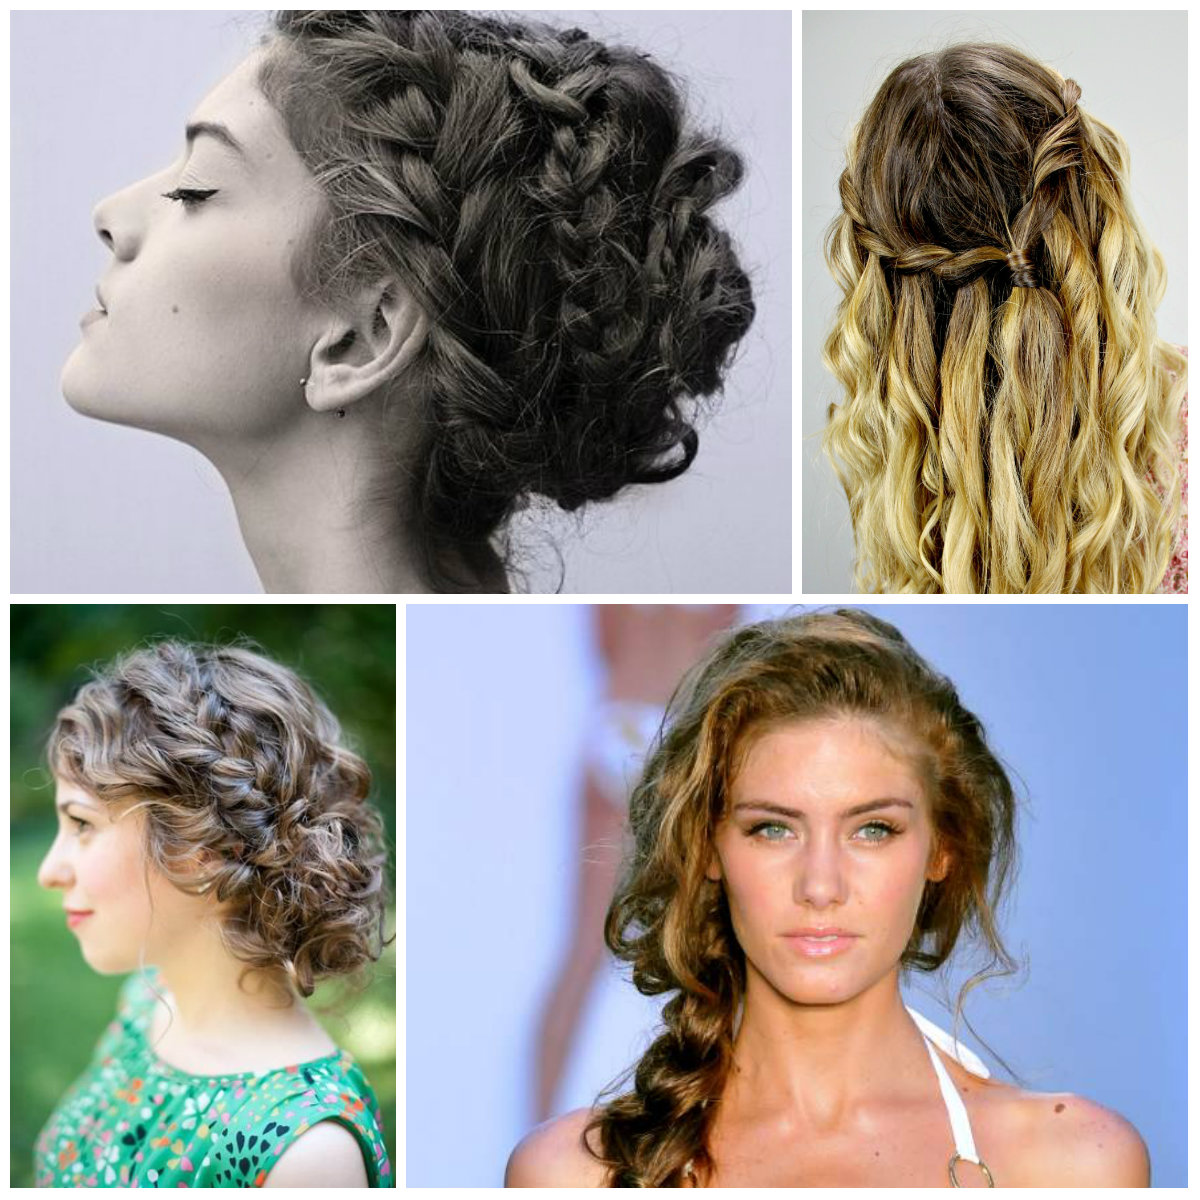 French Curl Braids Are Summer's It Girl Hairstyle & Here's How To